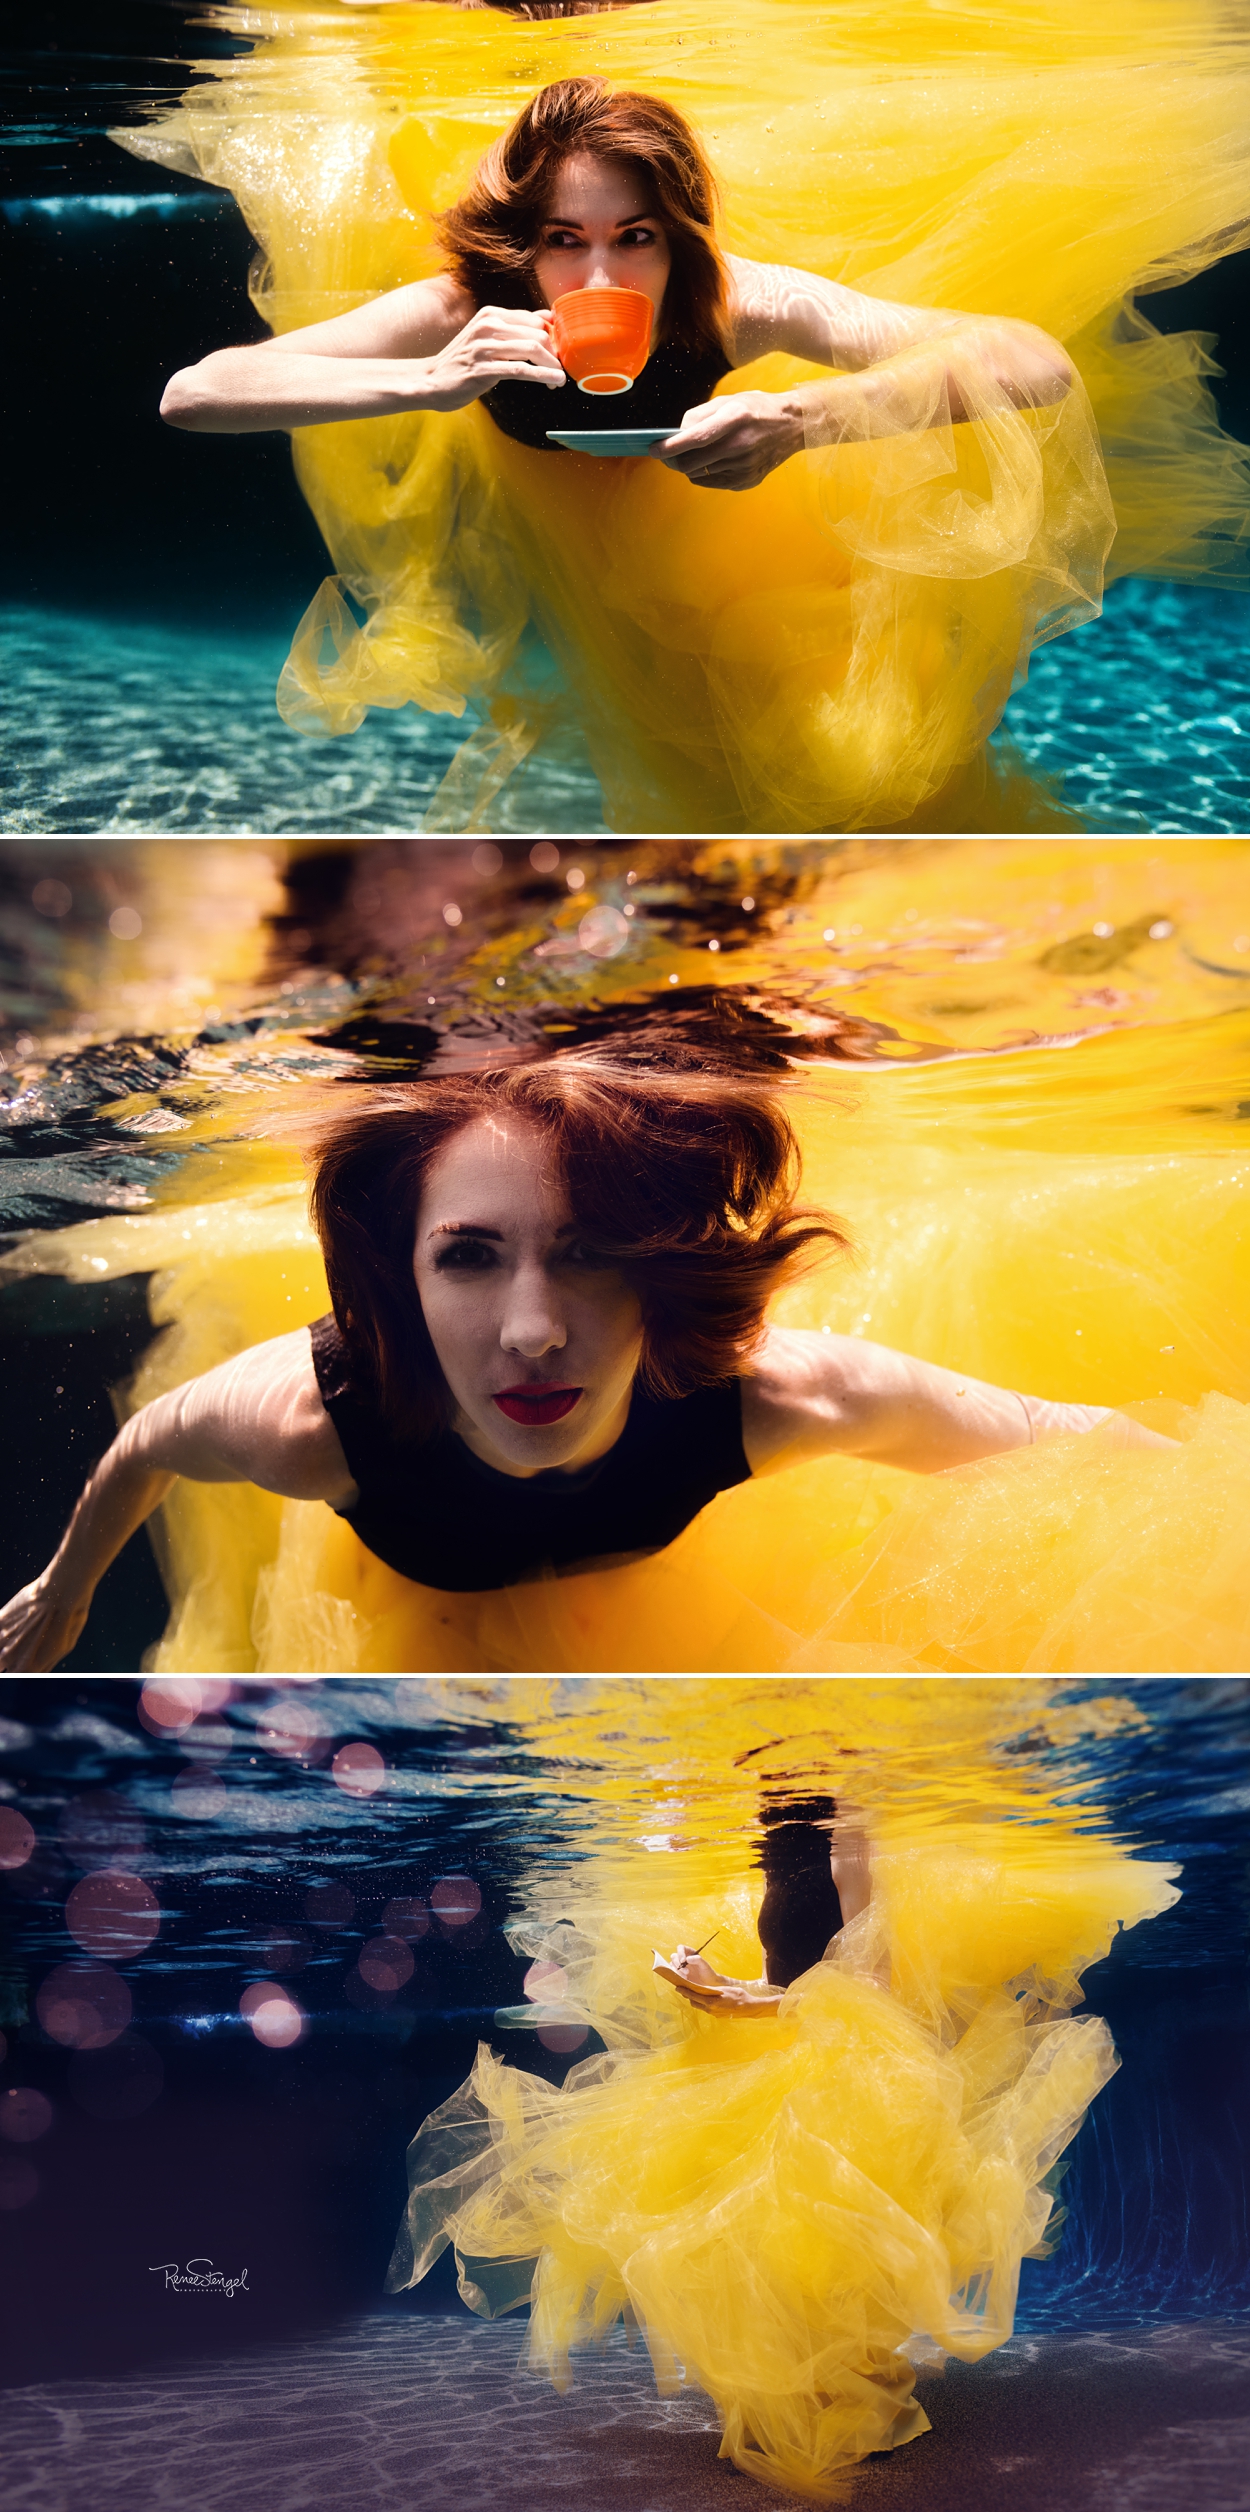 Woman swimming underwater in Yellow | Blue, Teal, Purple and Yellow